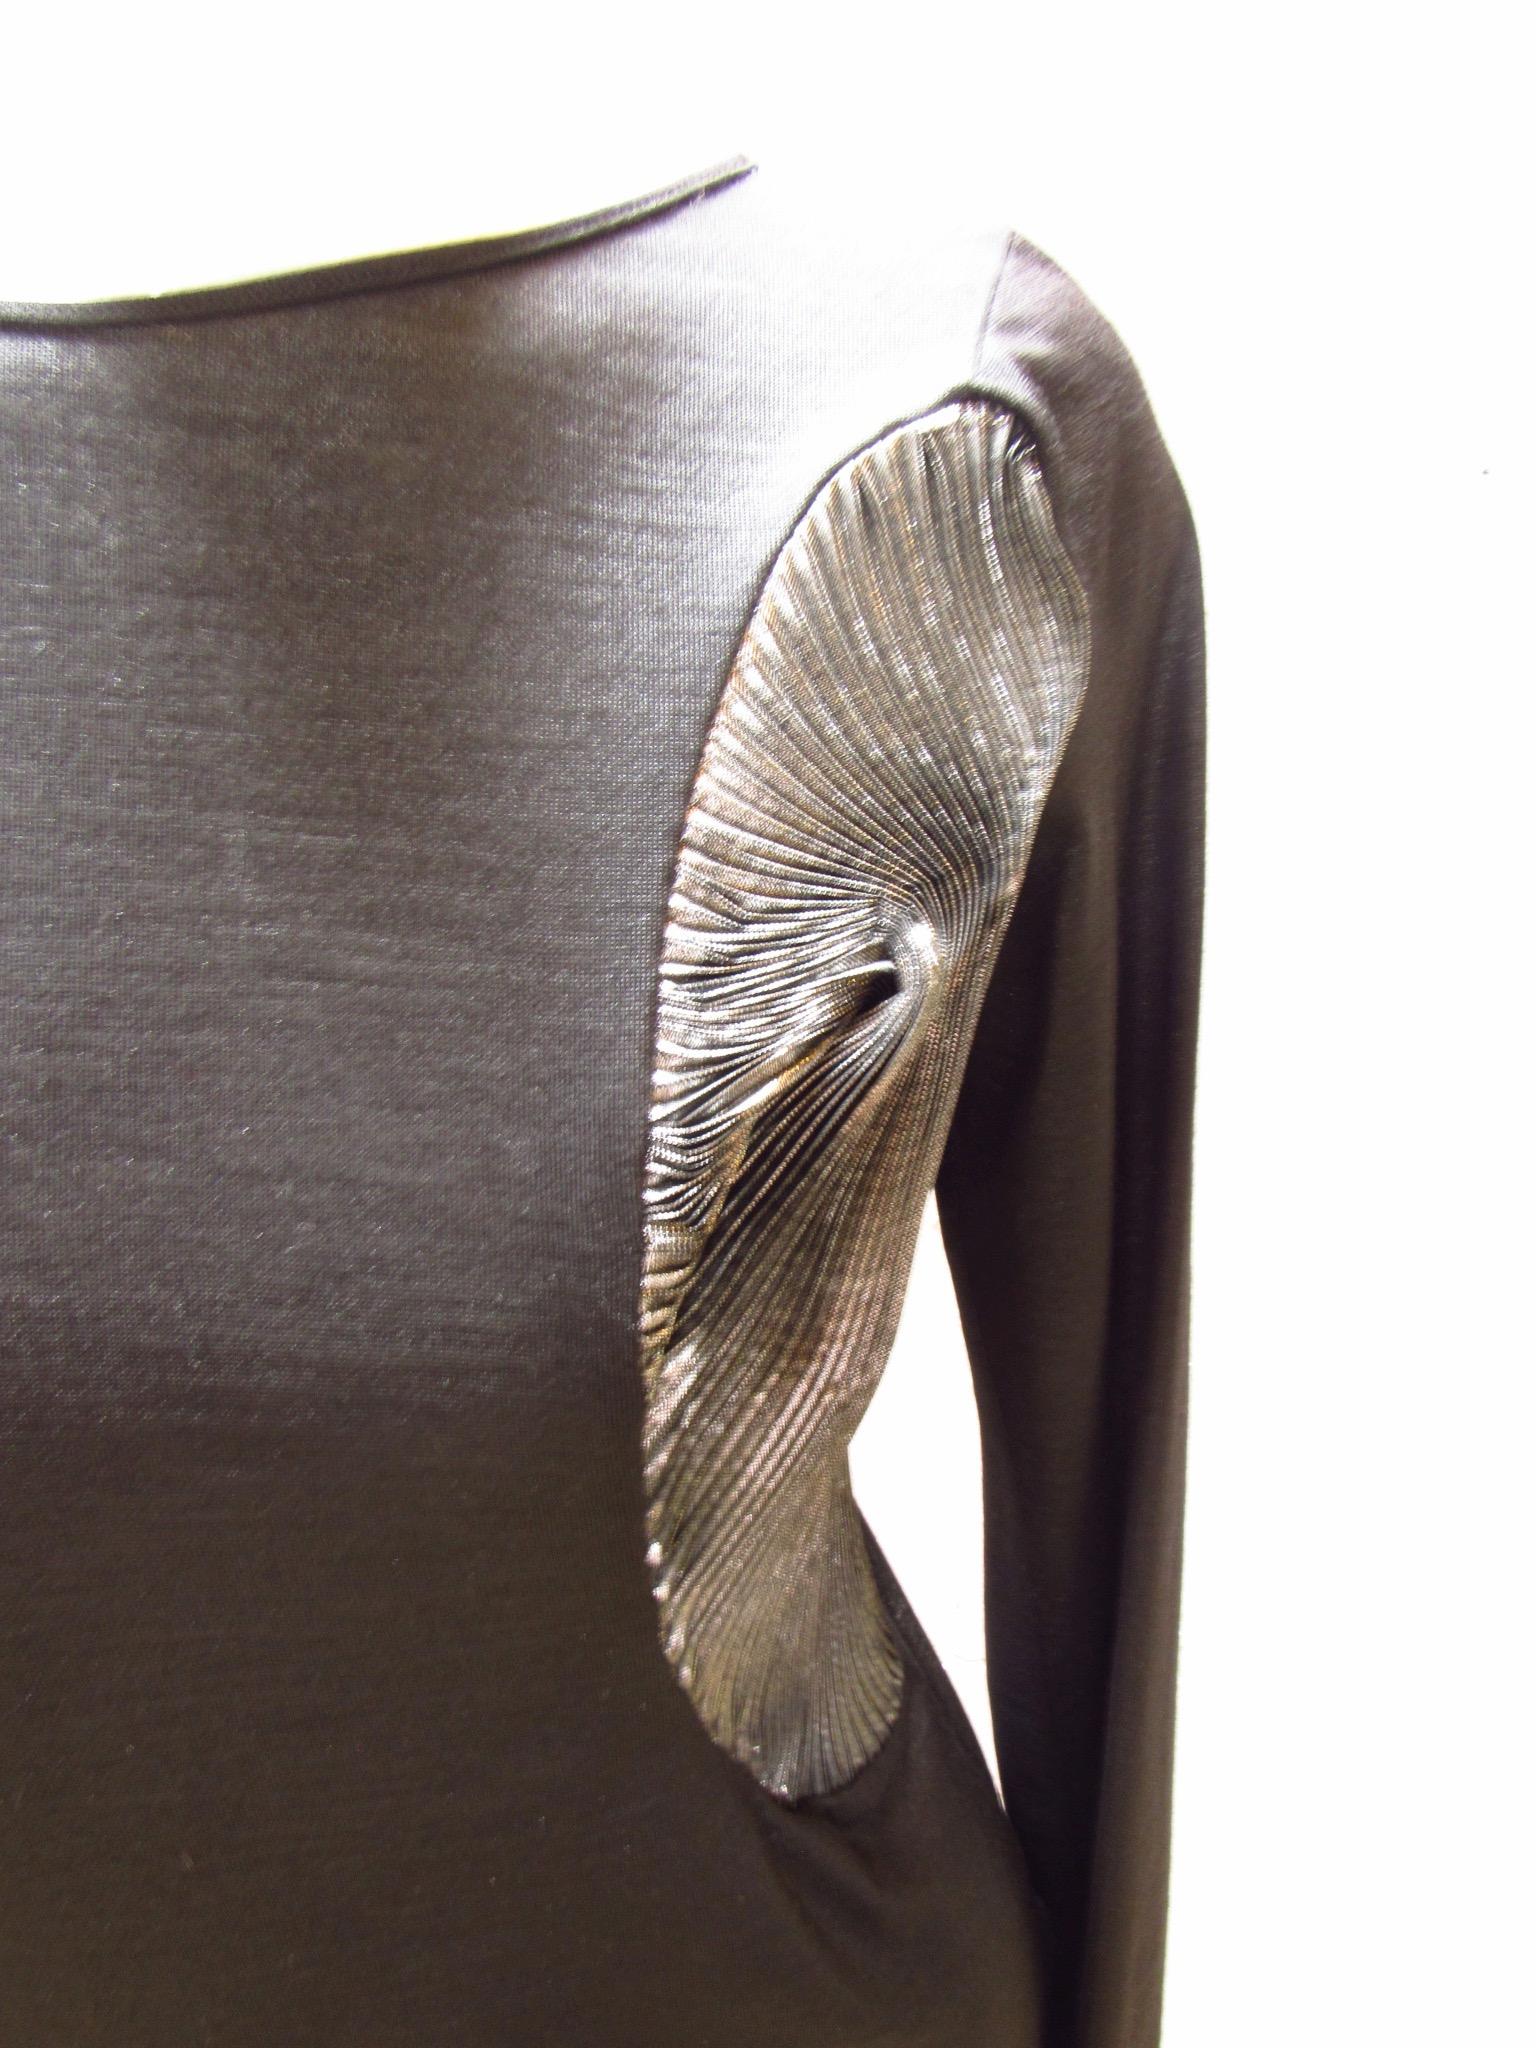 Hussein Chalayan Black and Silver Dress In New Condition For Sale In Laguna Beach, CA